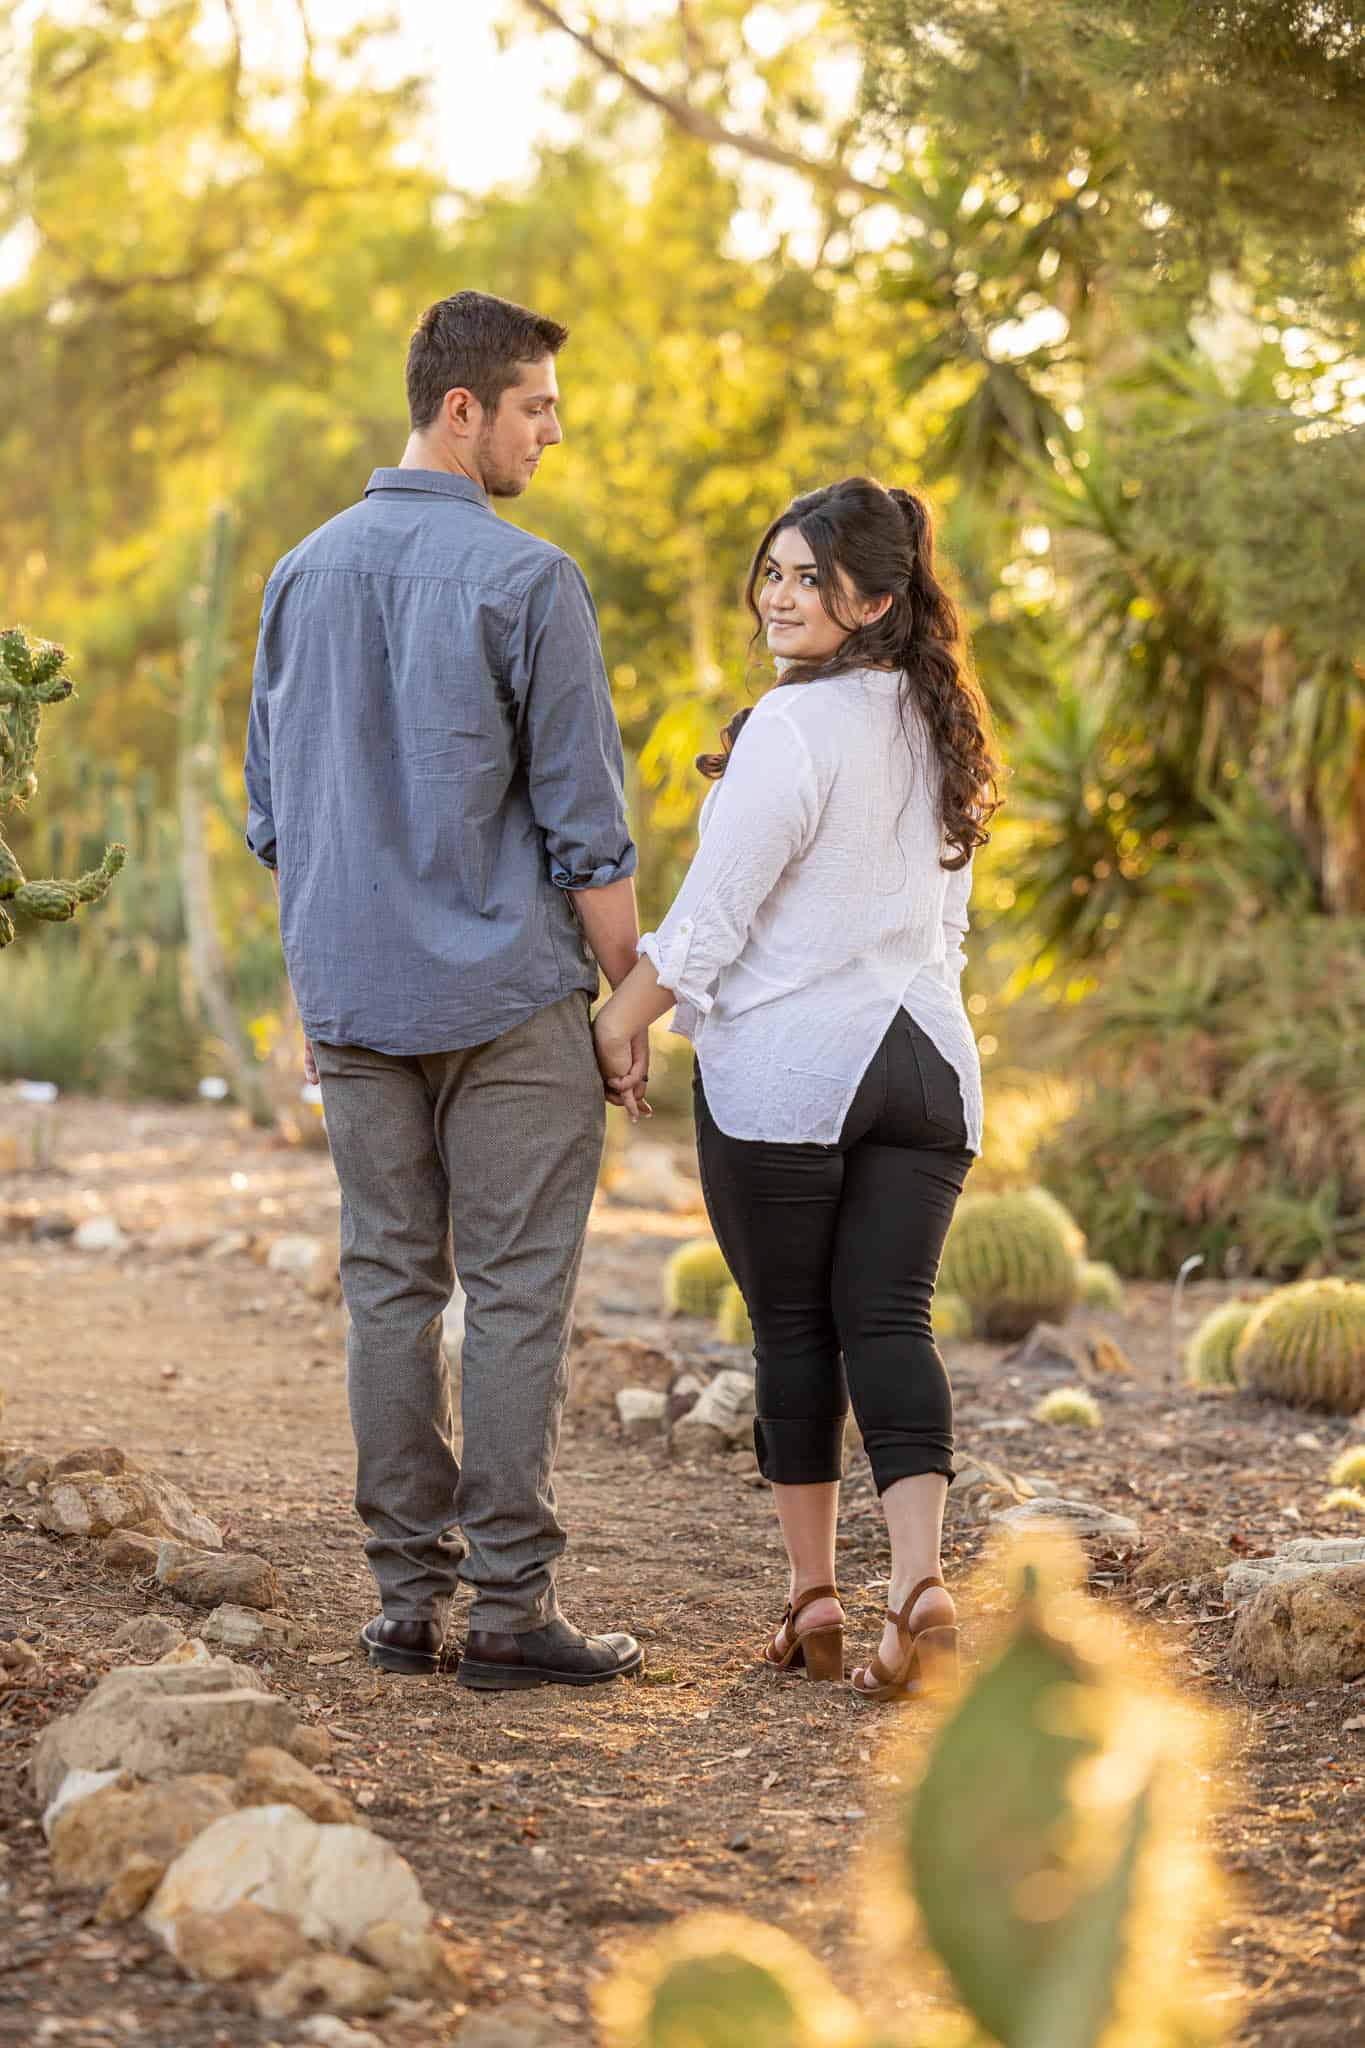 Thousand Oaks wedding photographer captures engagement session in Conejo Botanical Gardens with man and woman walking down a path together as the woman looks over her shoulder